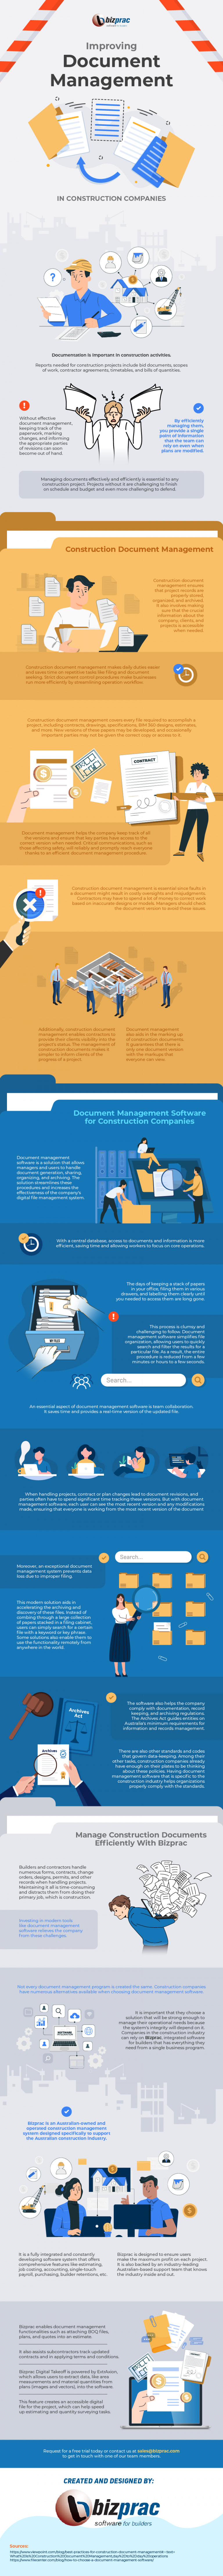 Improving-Document-Management-in-Construction Companies-Infographic-Image-0163